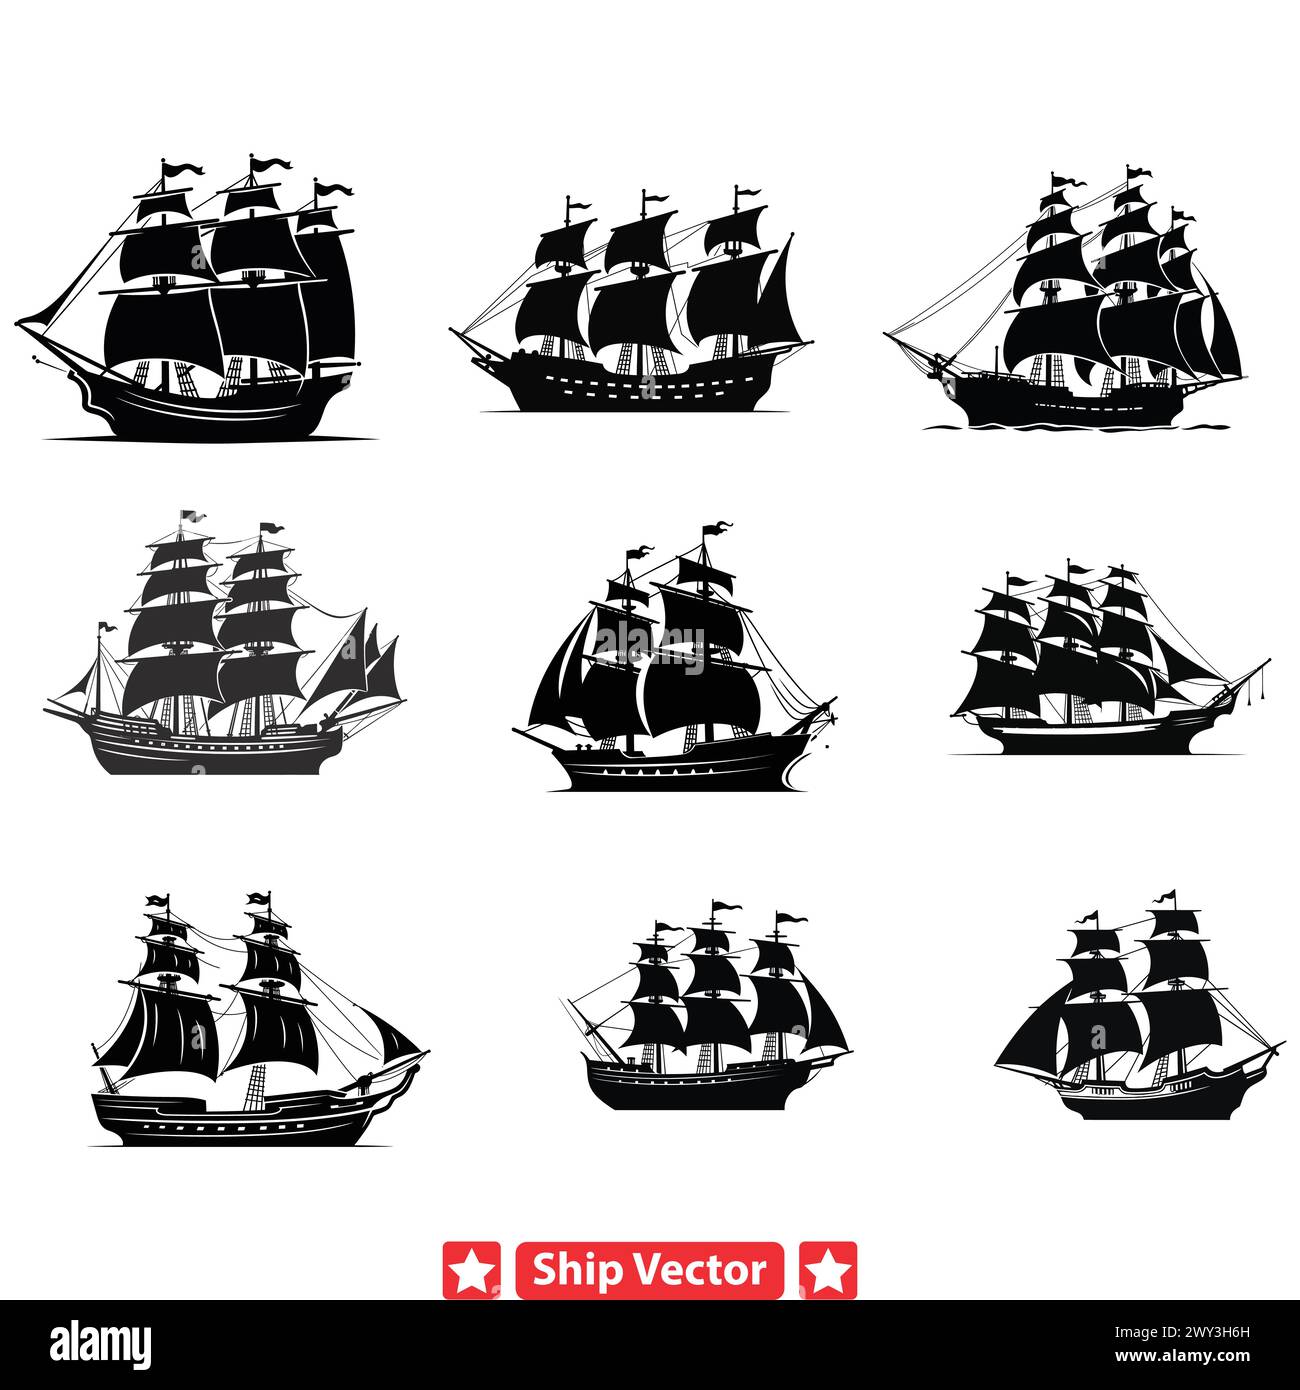 Stormy Seas  Intense Ship Silhouettes Evoking the Fury and Majesty of Nature s Power Stock Vector